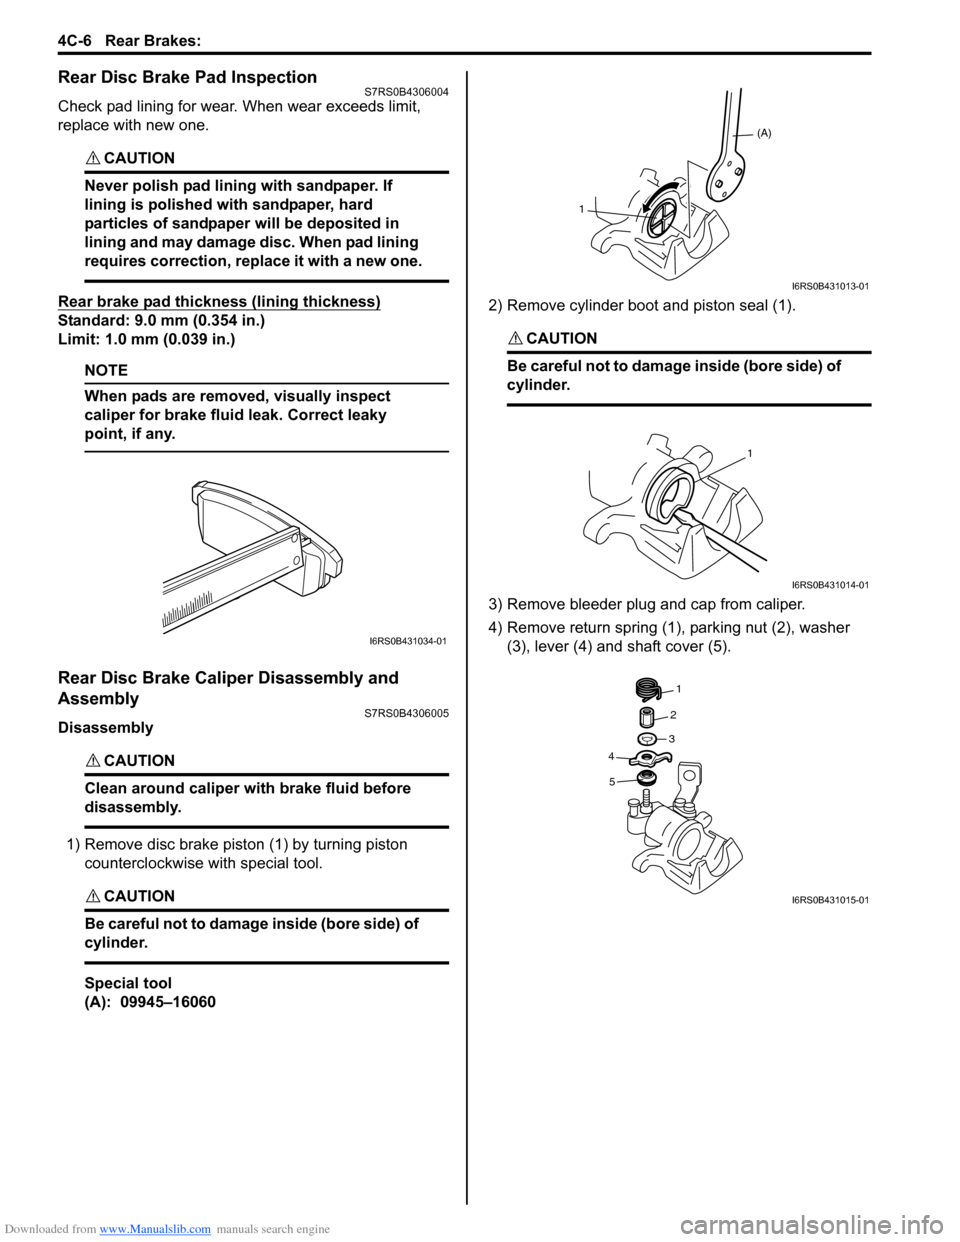 SUZUKI SWIFT 2005 2.G Service Workshop Manual Downloaded from www.Manualslib.com manuals search engine 4C-6 Rear Brakes: 
Rear Disc Brake Pad InspectionS7RS0B4306004
Check pad lining for wear. When wear exceeds limit, 
replace with new one.
CAUTI